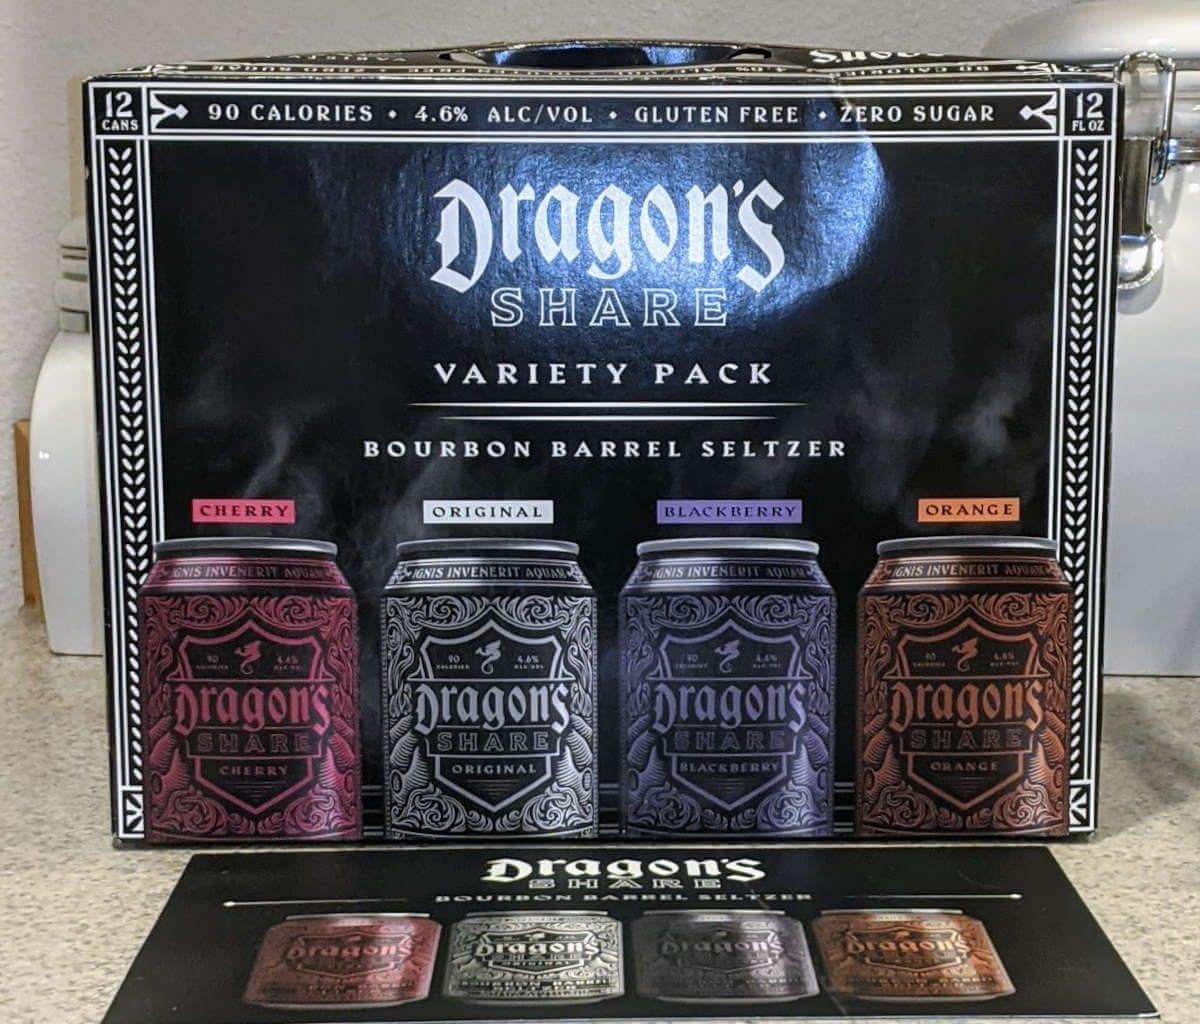 New Holland Brewing introduces Dragon’s Share Bourbon Barrel Seltzer (received)